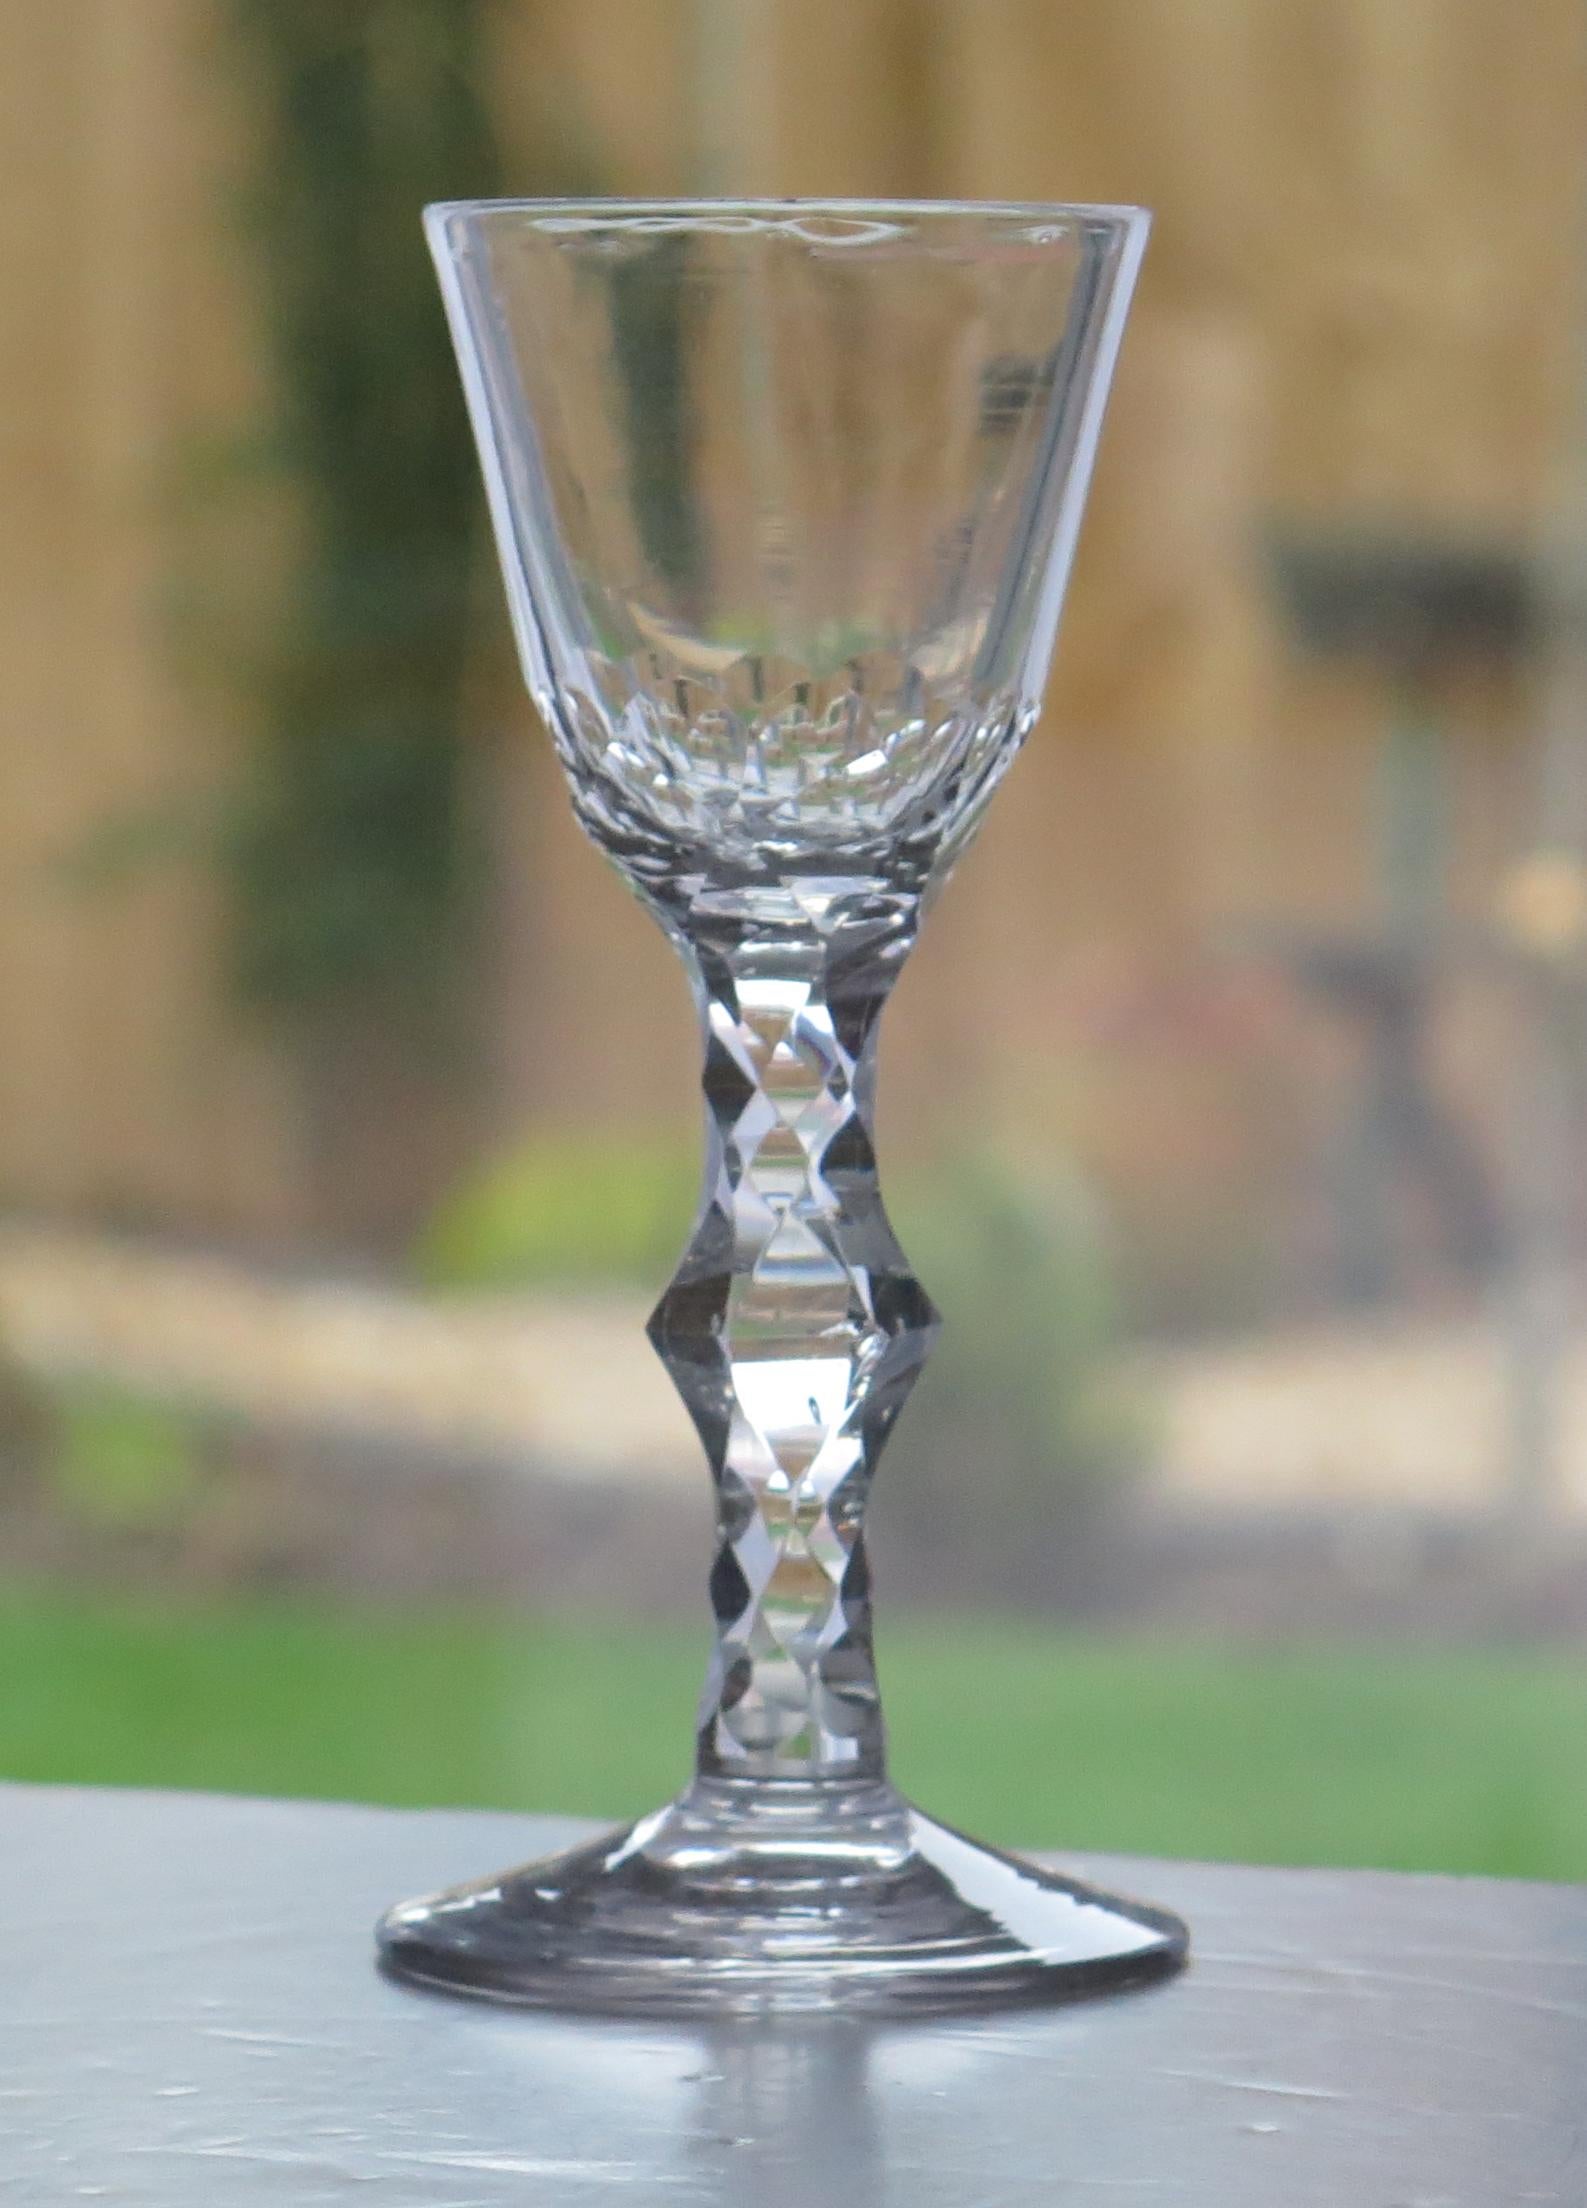 This is a very good hand-blown, English, Georgian, wine drinking glass with a facet cut stem, dating from the 18th century, circa 1785.

These glasses are very collectable. It is made from English lead glass which is relatively heavy and has a